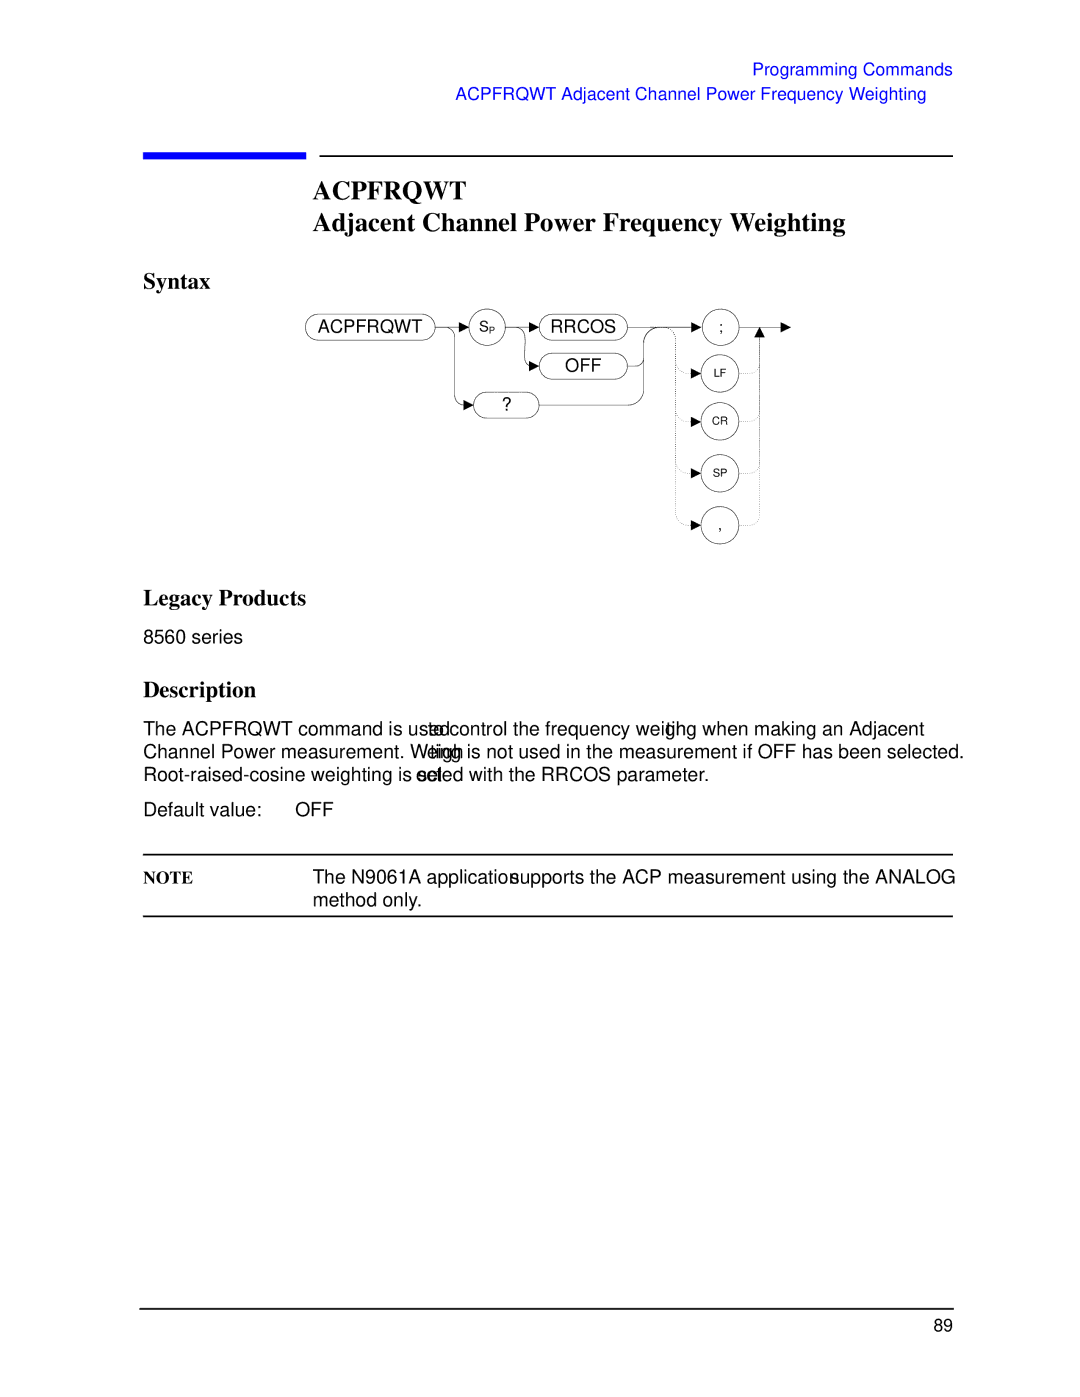 Agilent Technologies N9030a manual Acpfrqwt, Adjacent Channel Power Frequency Weighting 